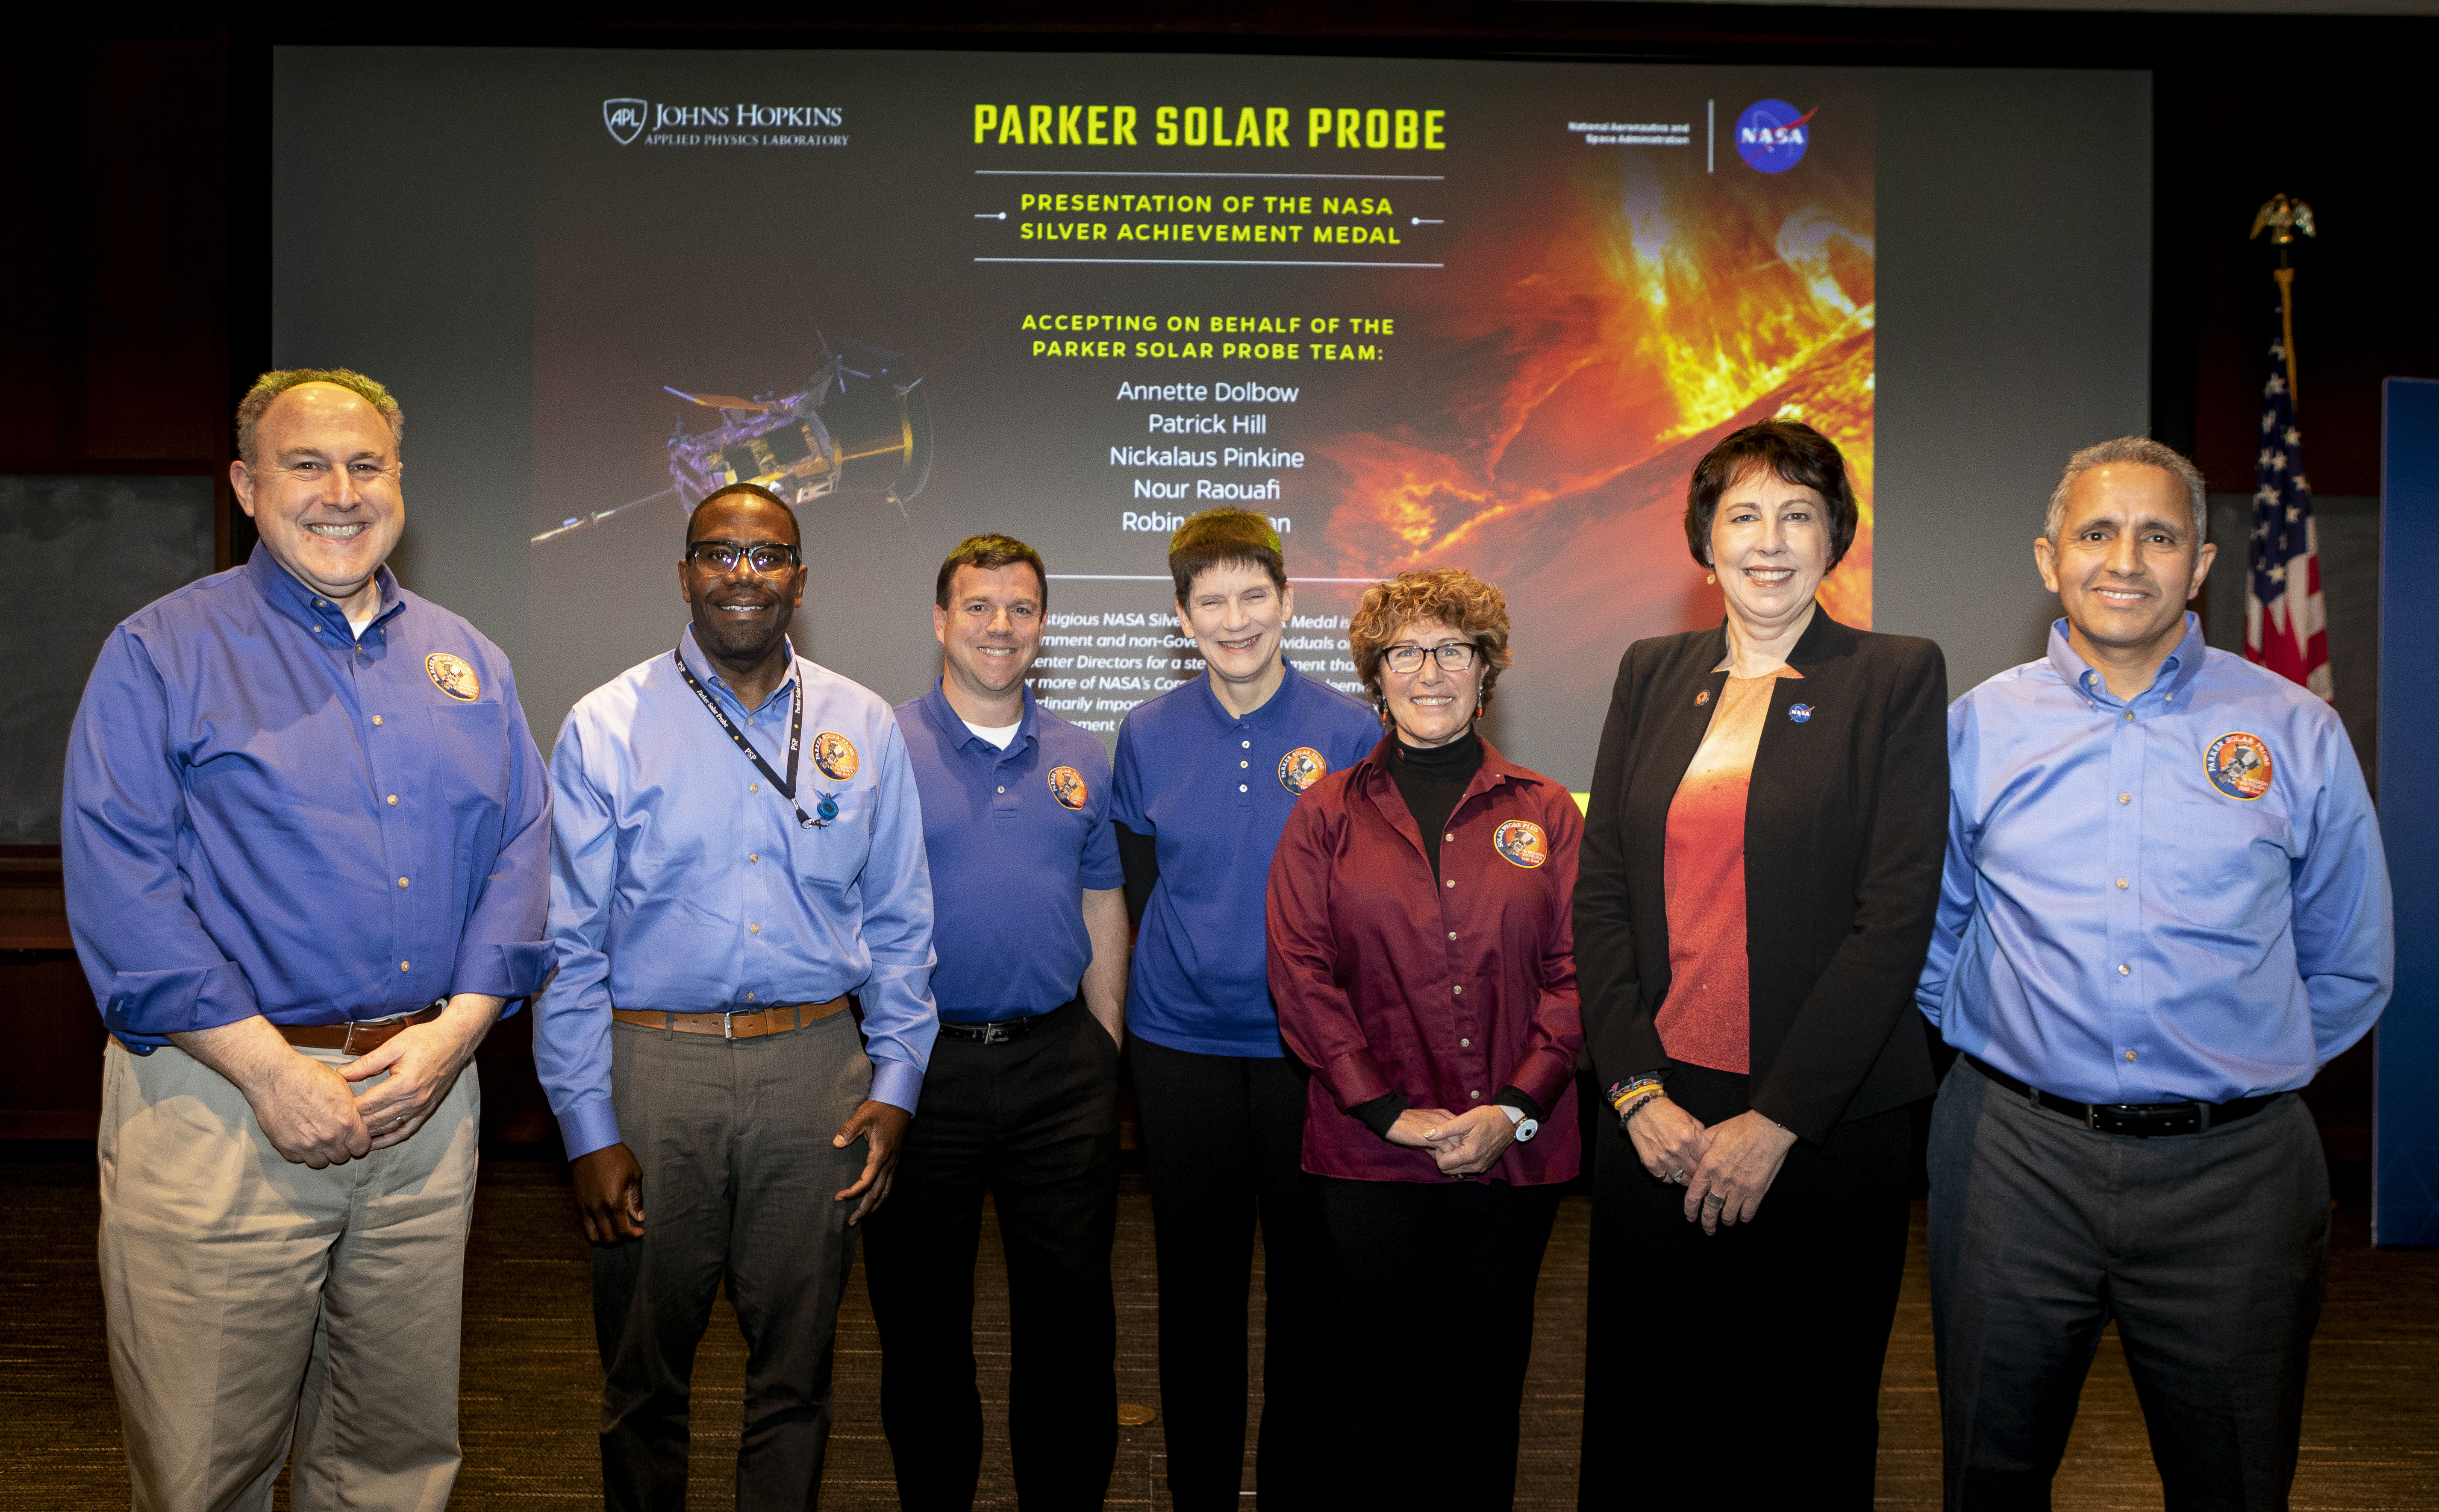 The Parker Solar Probe mission team at the Johns Hopkins Applied Physics Laboratory was awarded the NASA Silver Achievement Medal on Nov. 12 for “stellar achievement in the successful development, launch, and commissioning of the Parker Solar Probe, NASA’s coolest, hottest mission.” Pictured left to right: Andy Driesman, APL, previous project manager; Patrick Hill, APL, current project manager; Nickalaus Pinkine, APL, mission operations manager; Robin Vaughn, APL, spacecraft system engineer; Annette Dolbow, APL, integration and testing lead engineer; Nicky Fox, NASA Heliophysics Division director; and Nour Raouafi, APL, project scientist. 